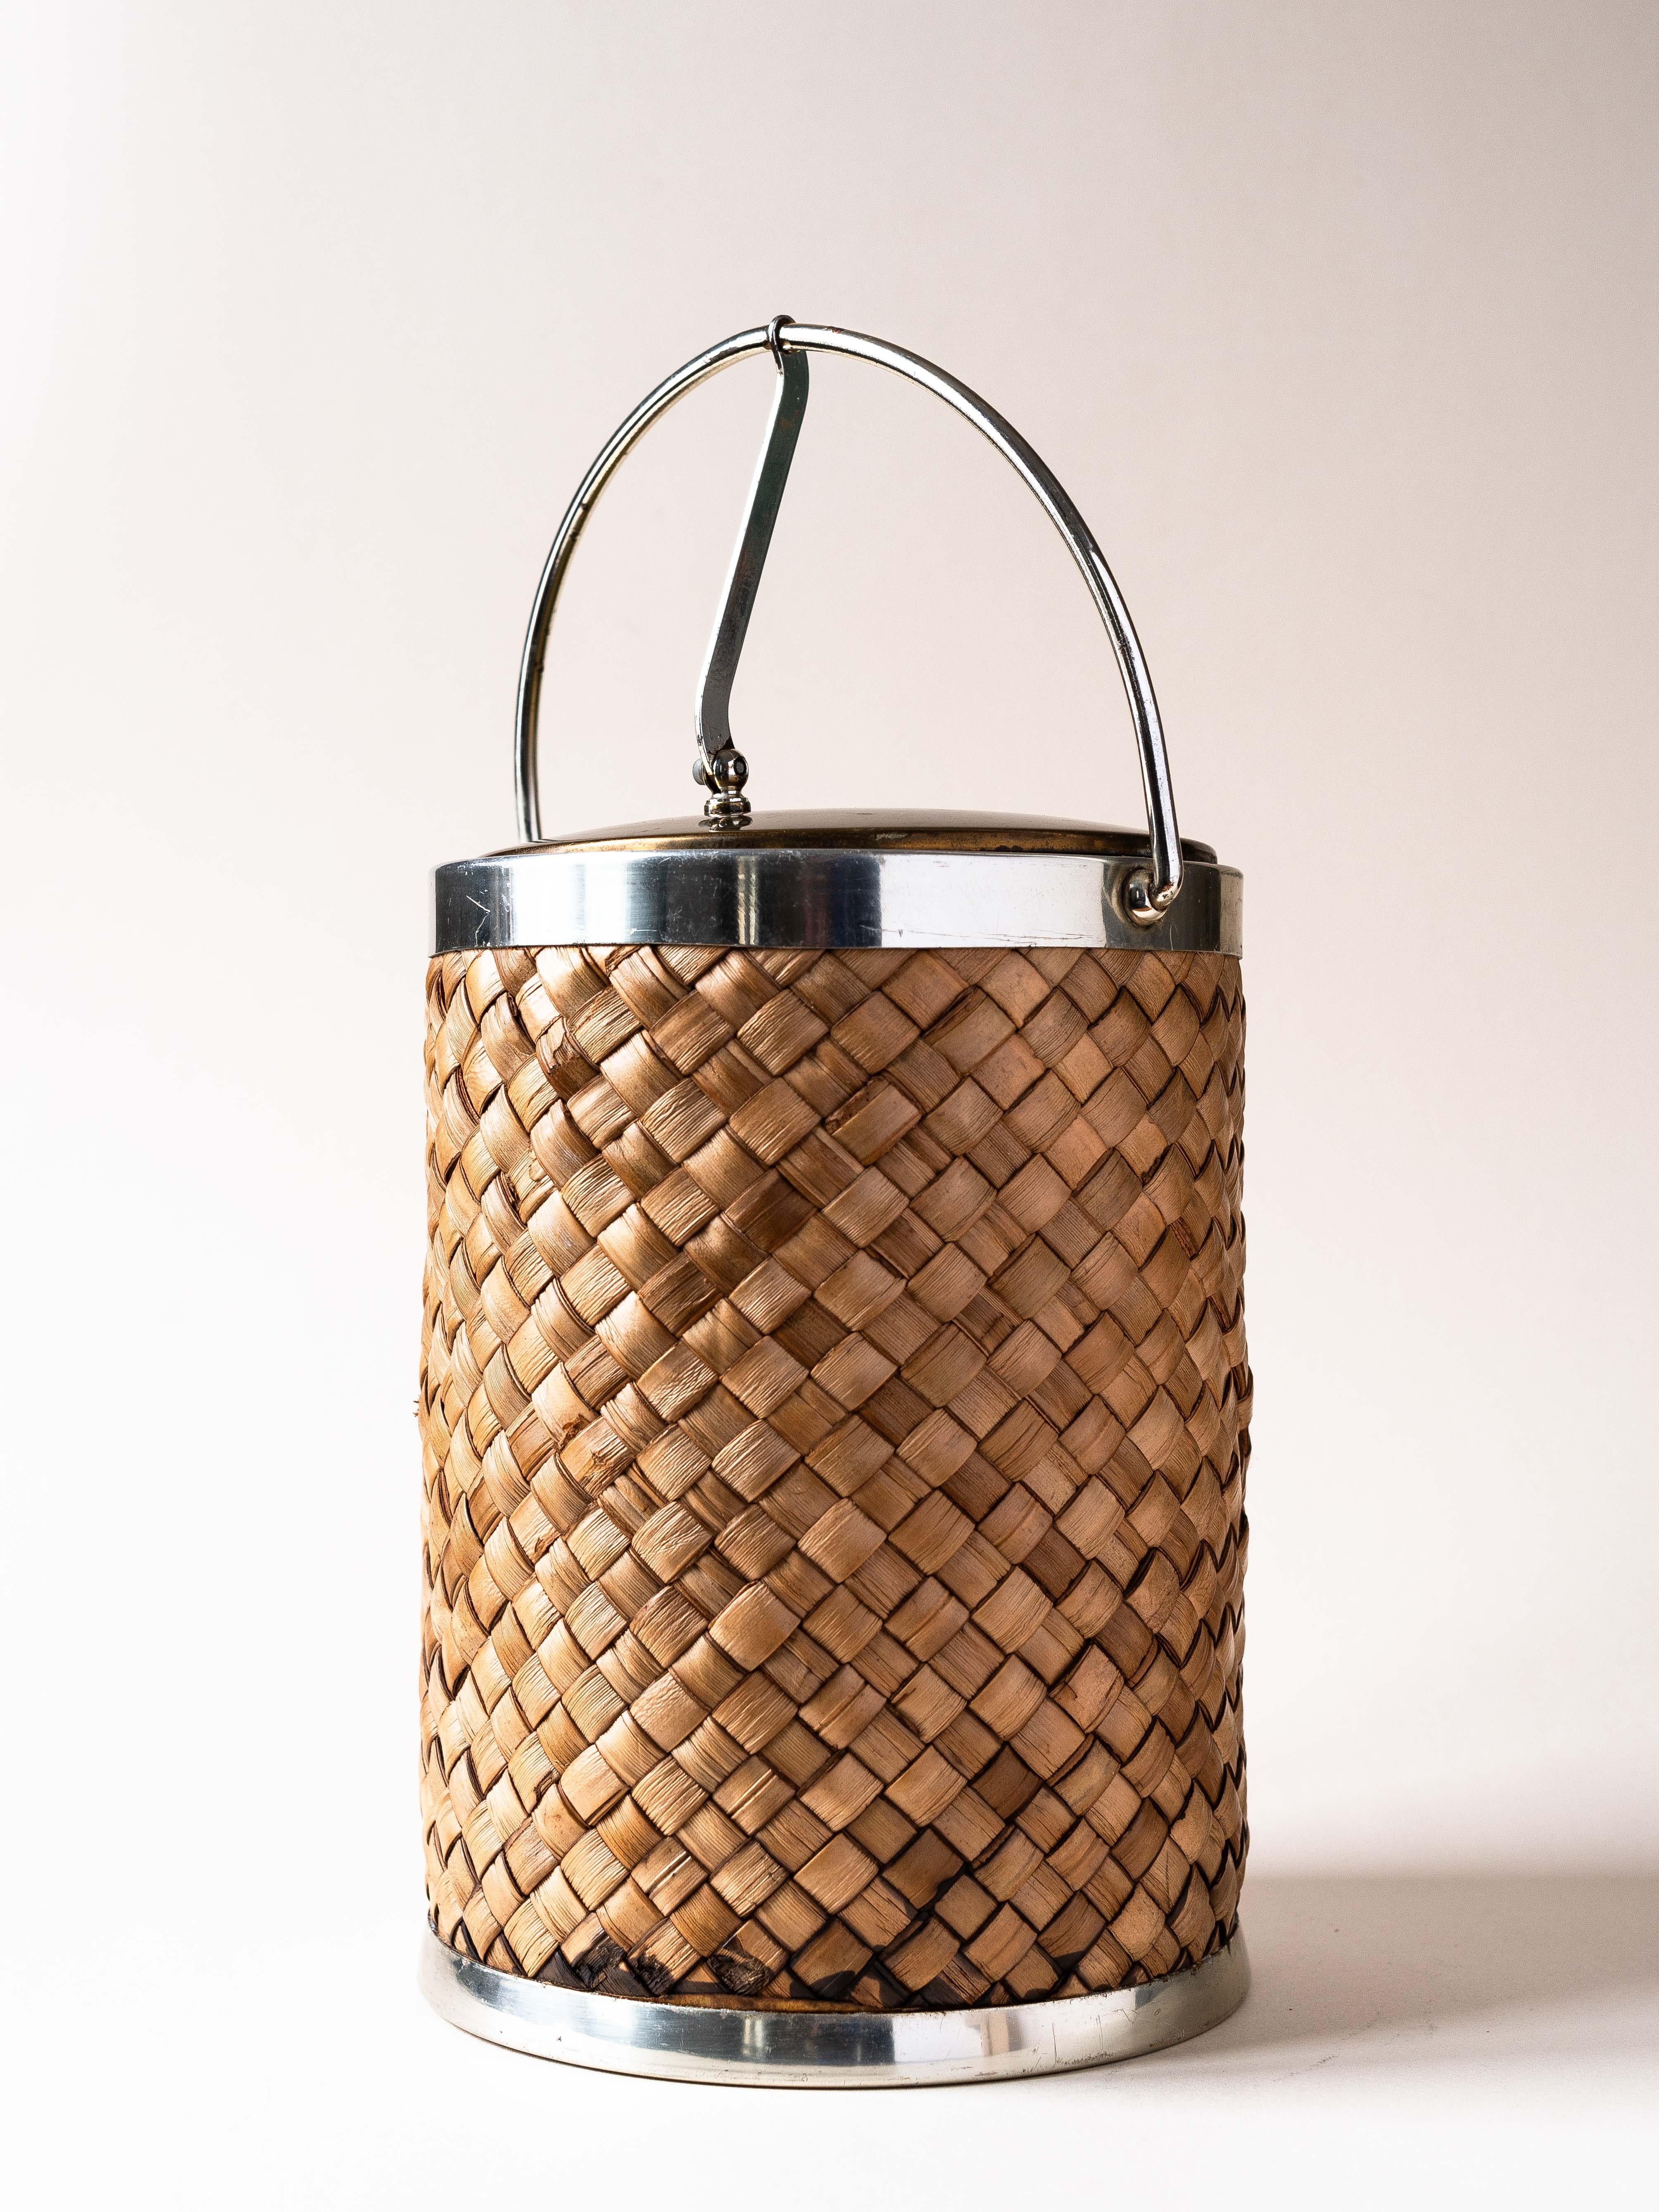 Champagne and Ice Bucket from the 1970s.

Made with braided raffia and gold metal. The inside is made of white plastic.

Manufacturer is Kraftware Company NY City. 

Beautiful patina especially on the metal parts which now turn silver.

Traces of